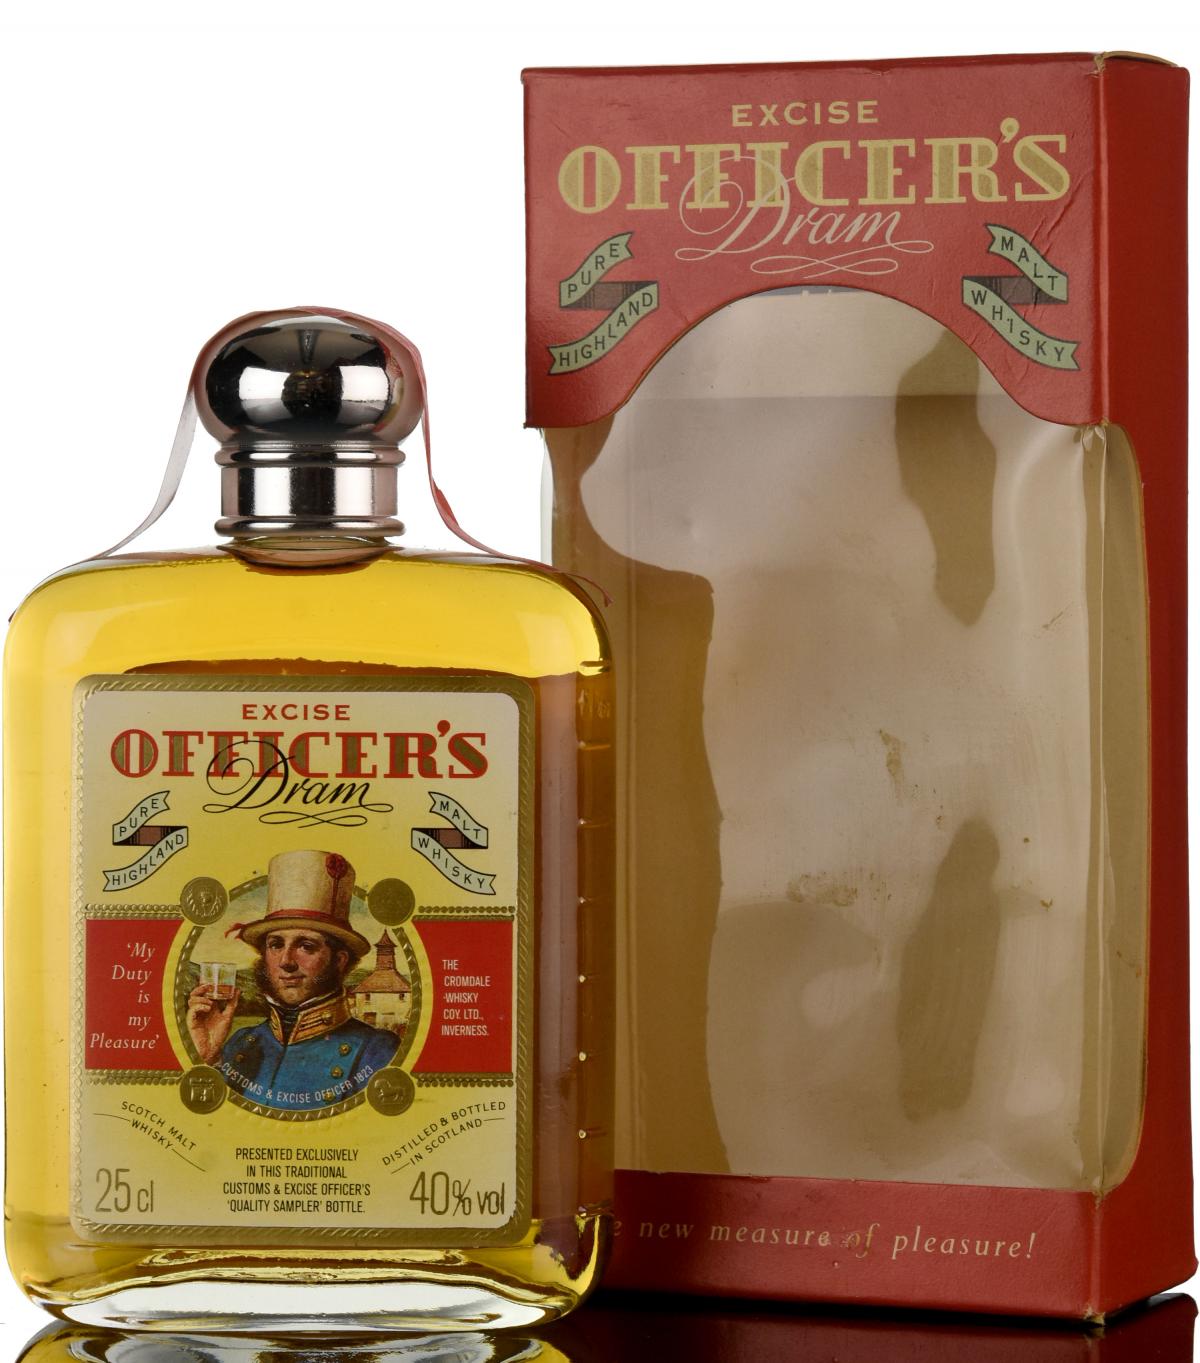 Excise Officers - 25cl